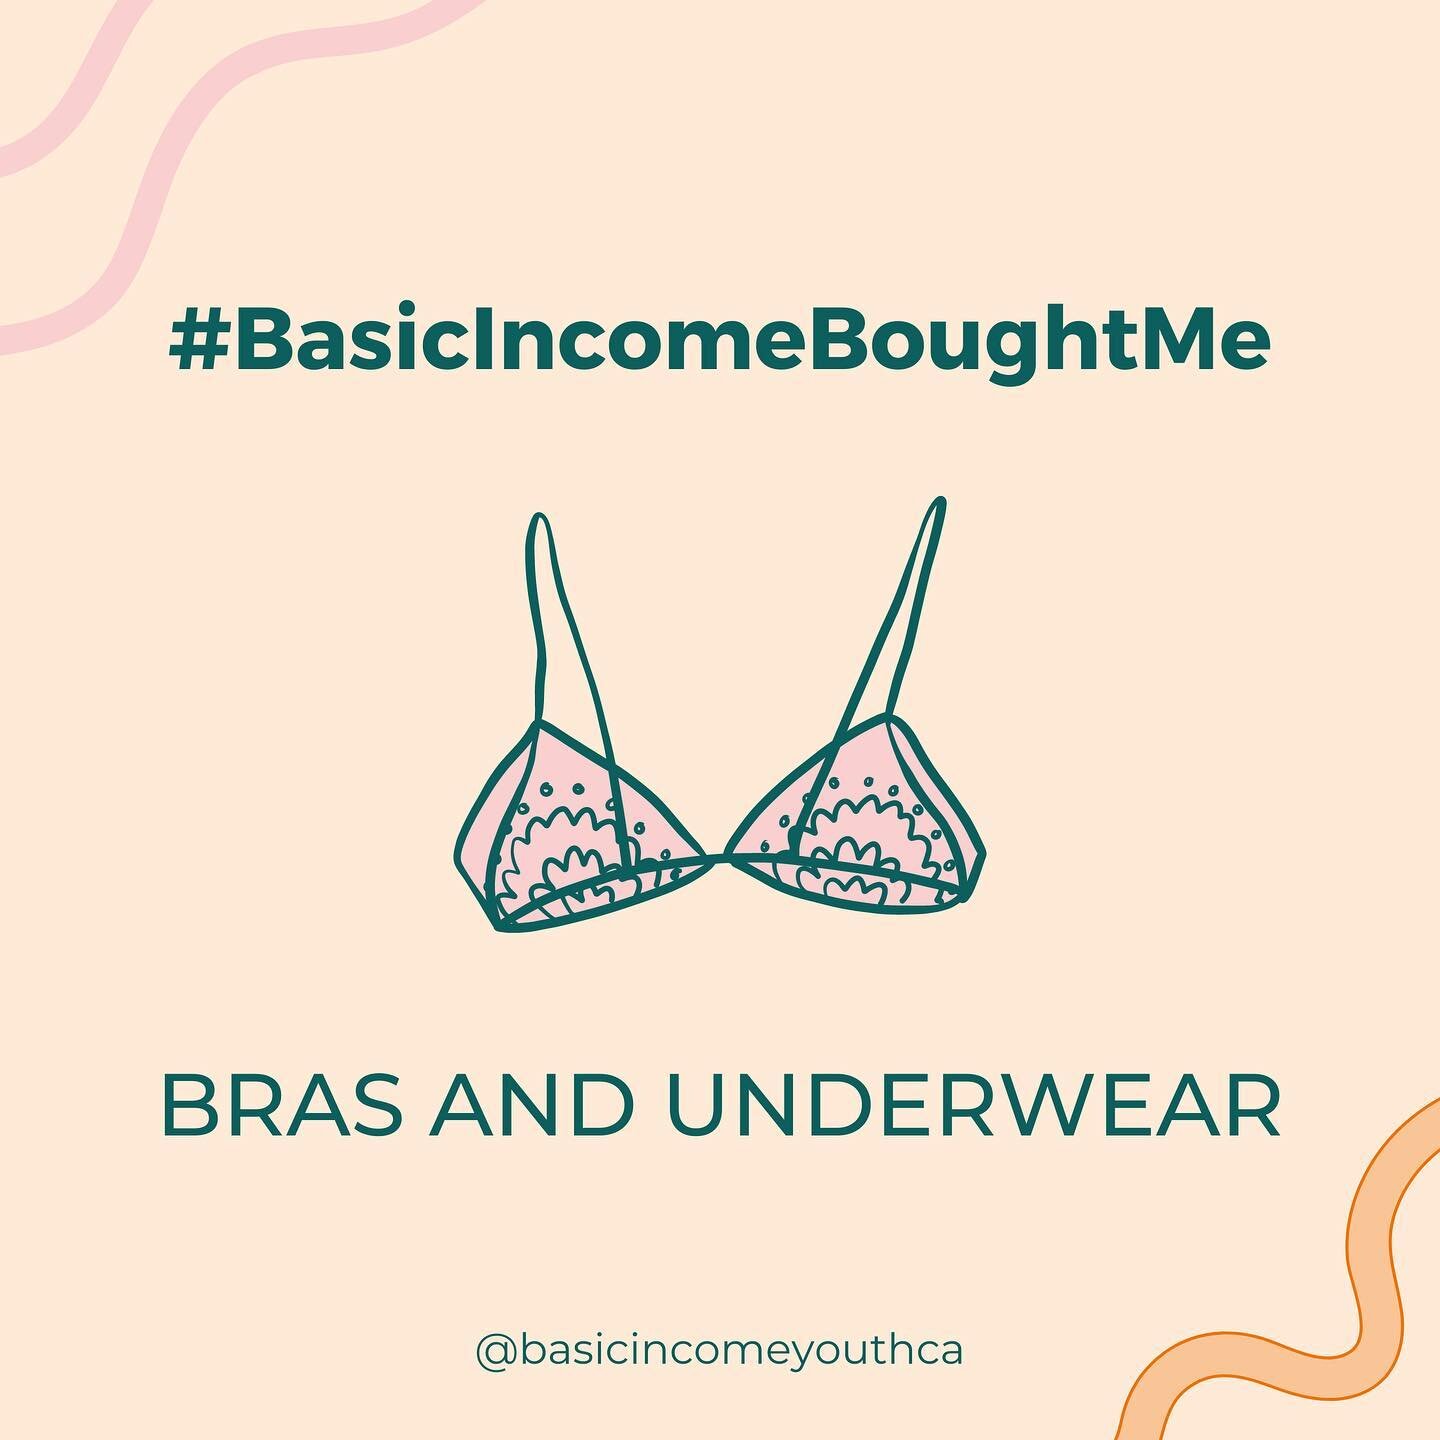 We all know how good it feels to rock a stellar outfit, a new haircut, or find that one-of-a-kind piece of clothing to complete our wardrobe. This week, we're sharing how recipients spent basic income payments on clothing, hygiene, and personal care 